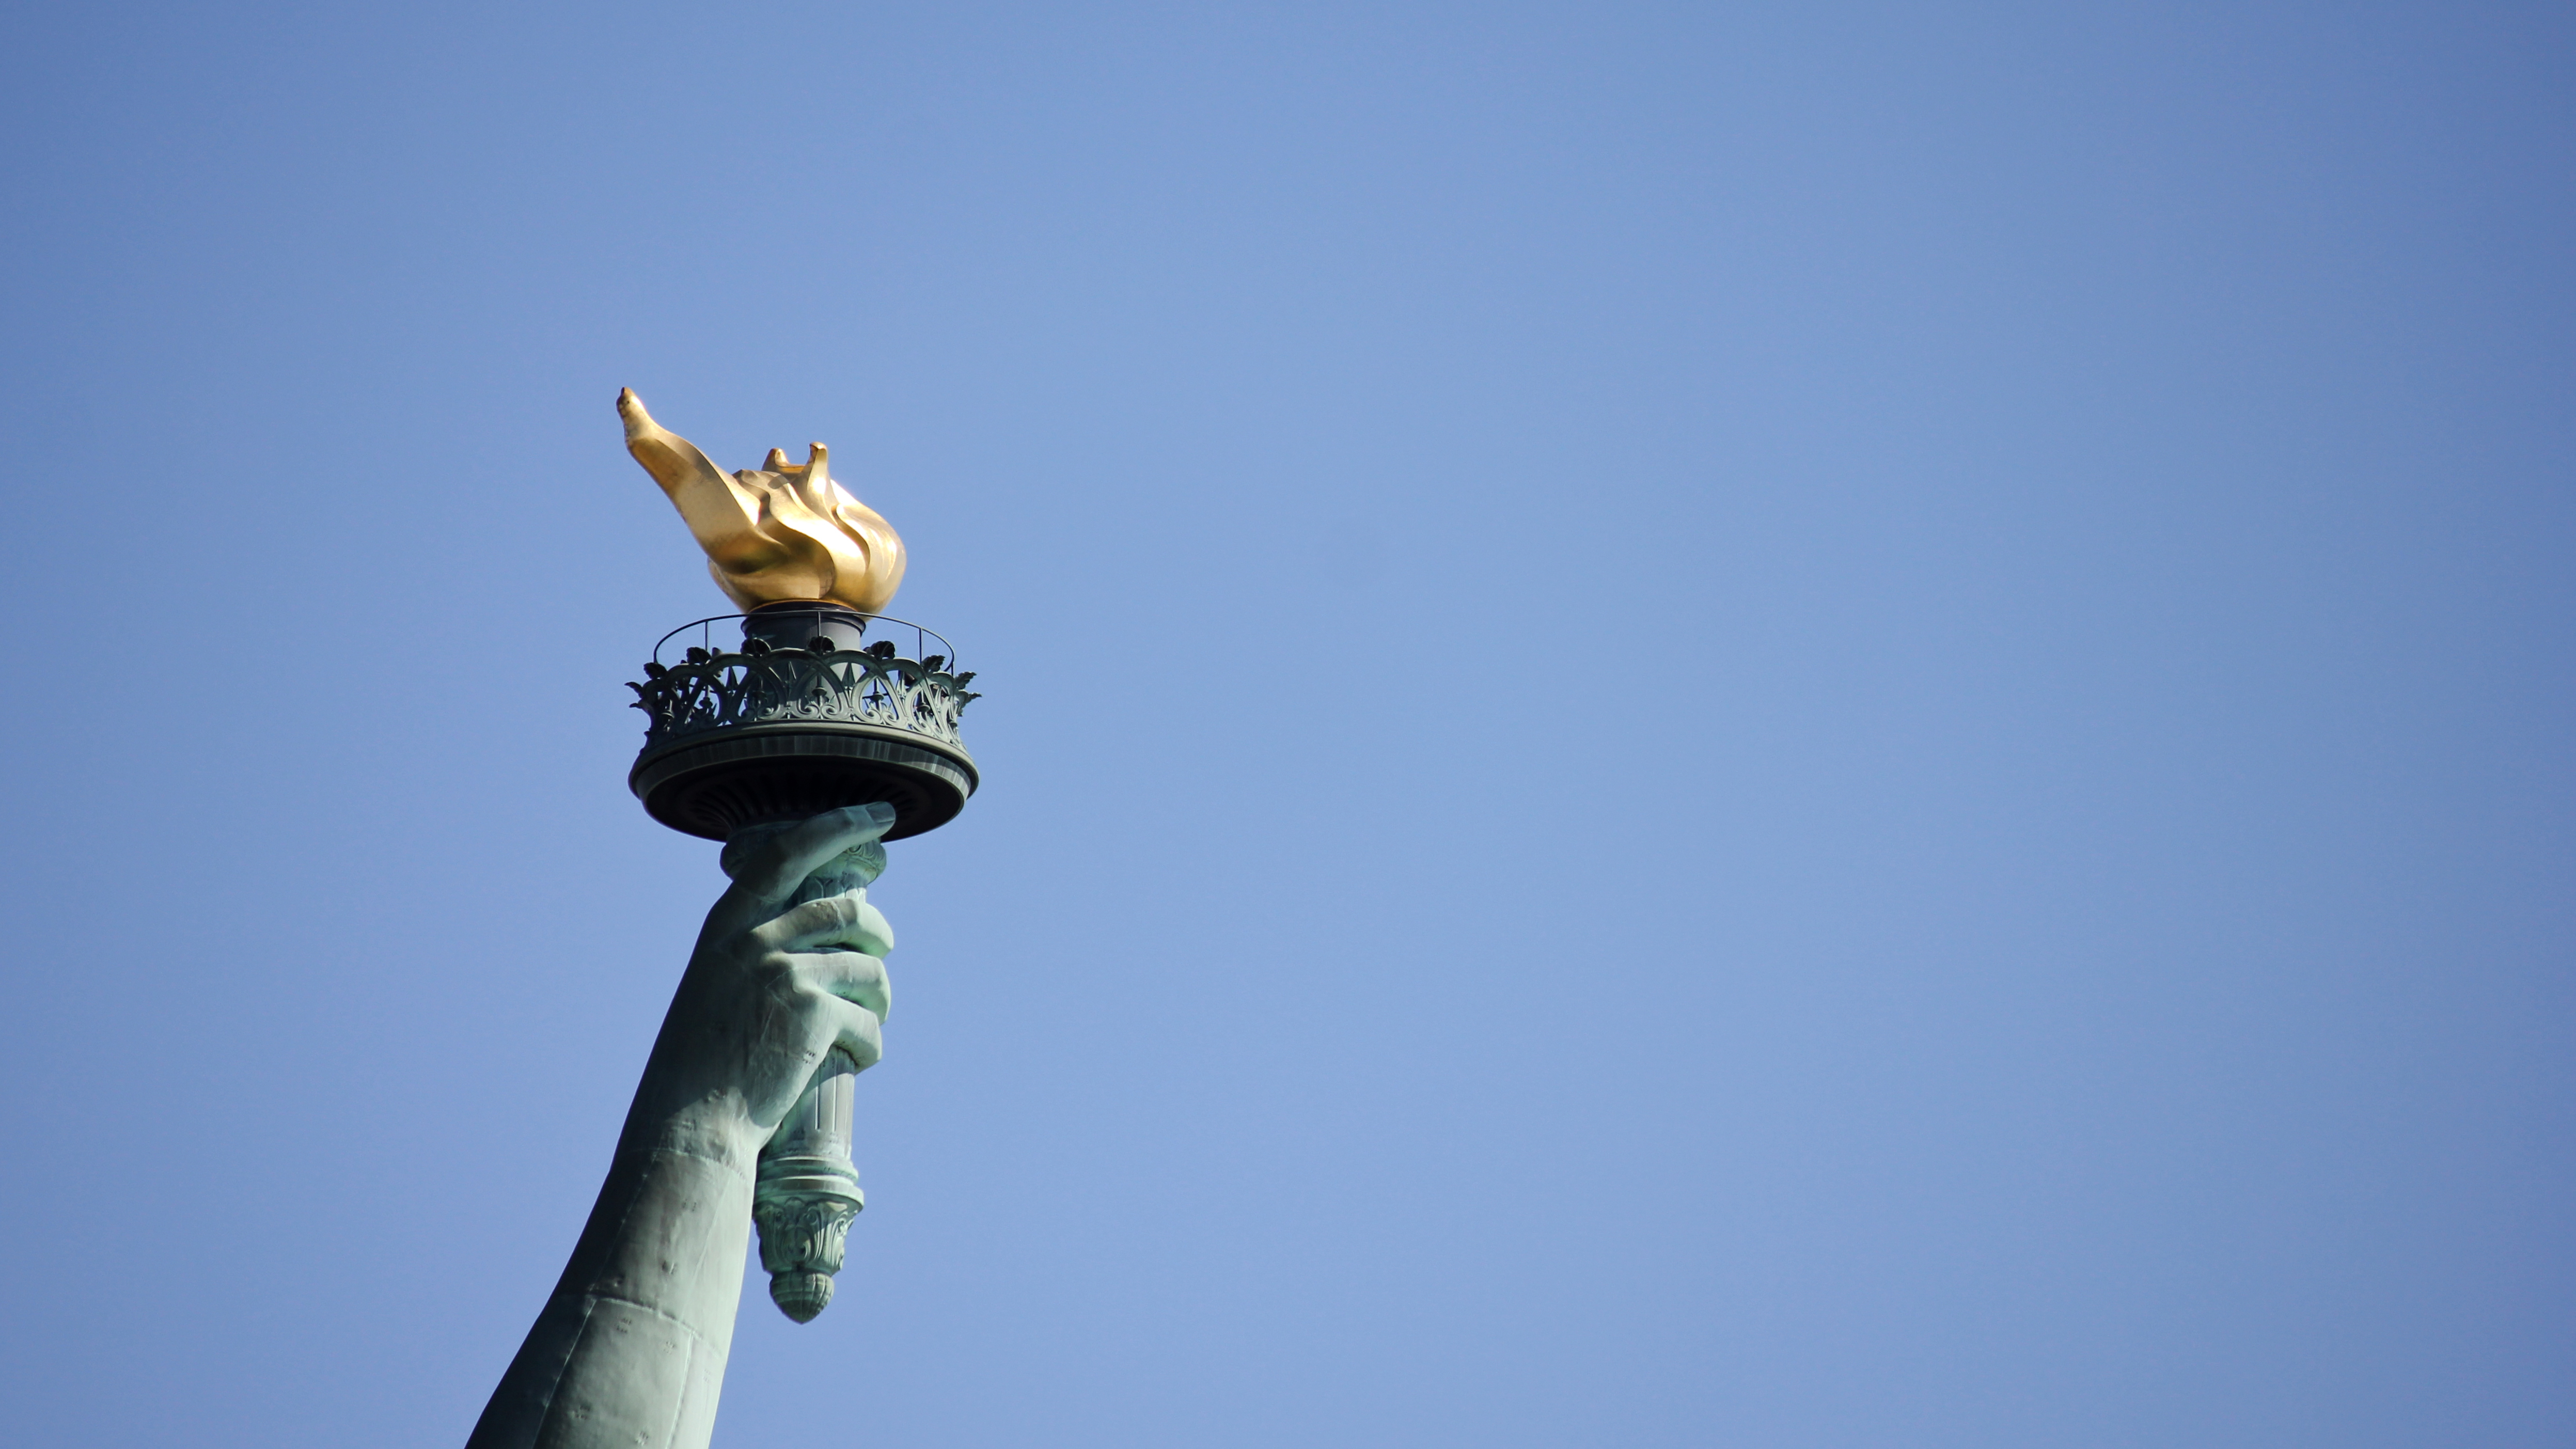 Statute of liberty torch and flame freedom house